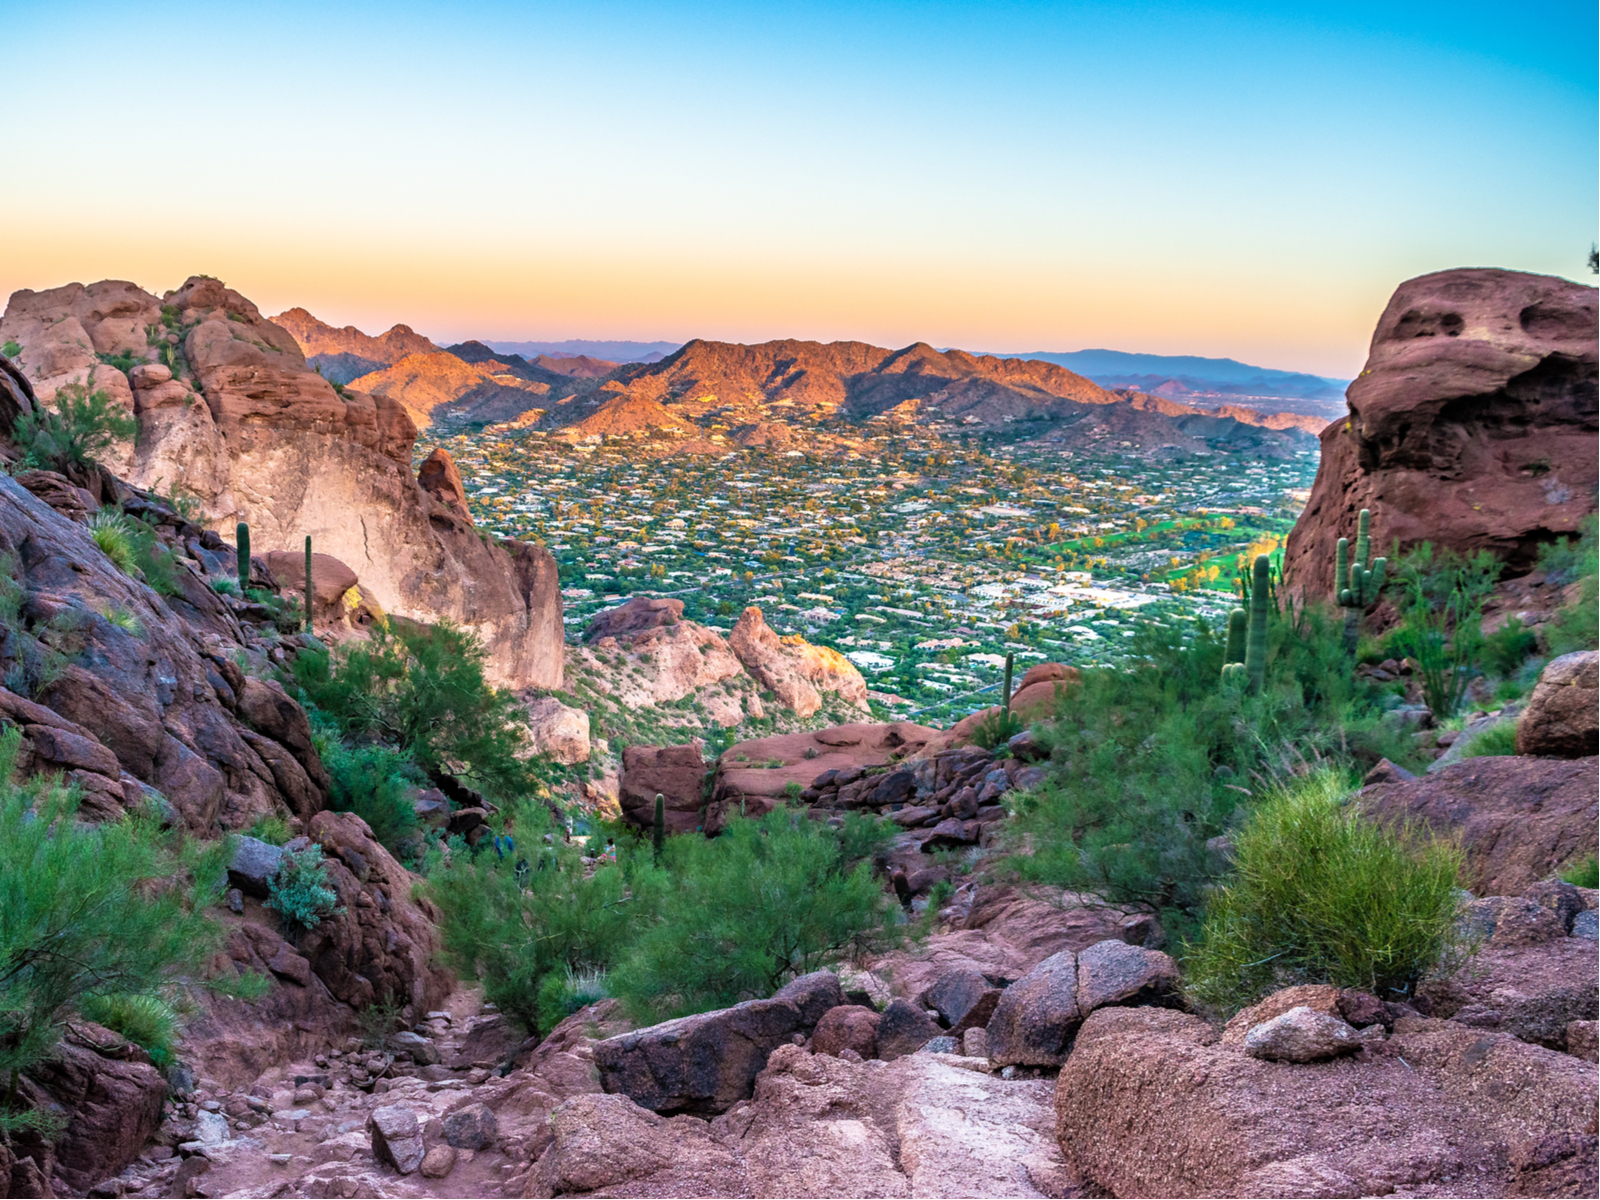 Camelback mountain pictured overlooking Scottsdale for a piece on the best time to visit Arizona